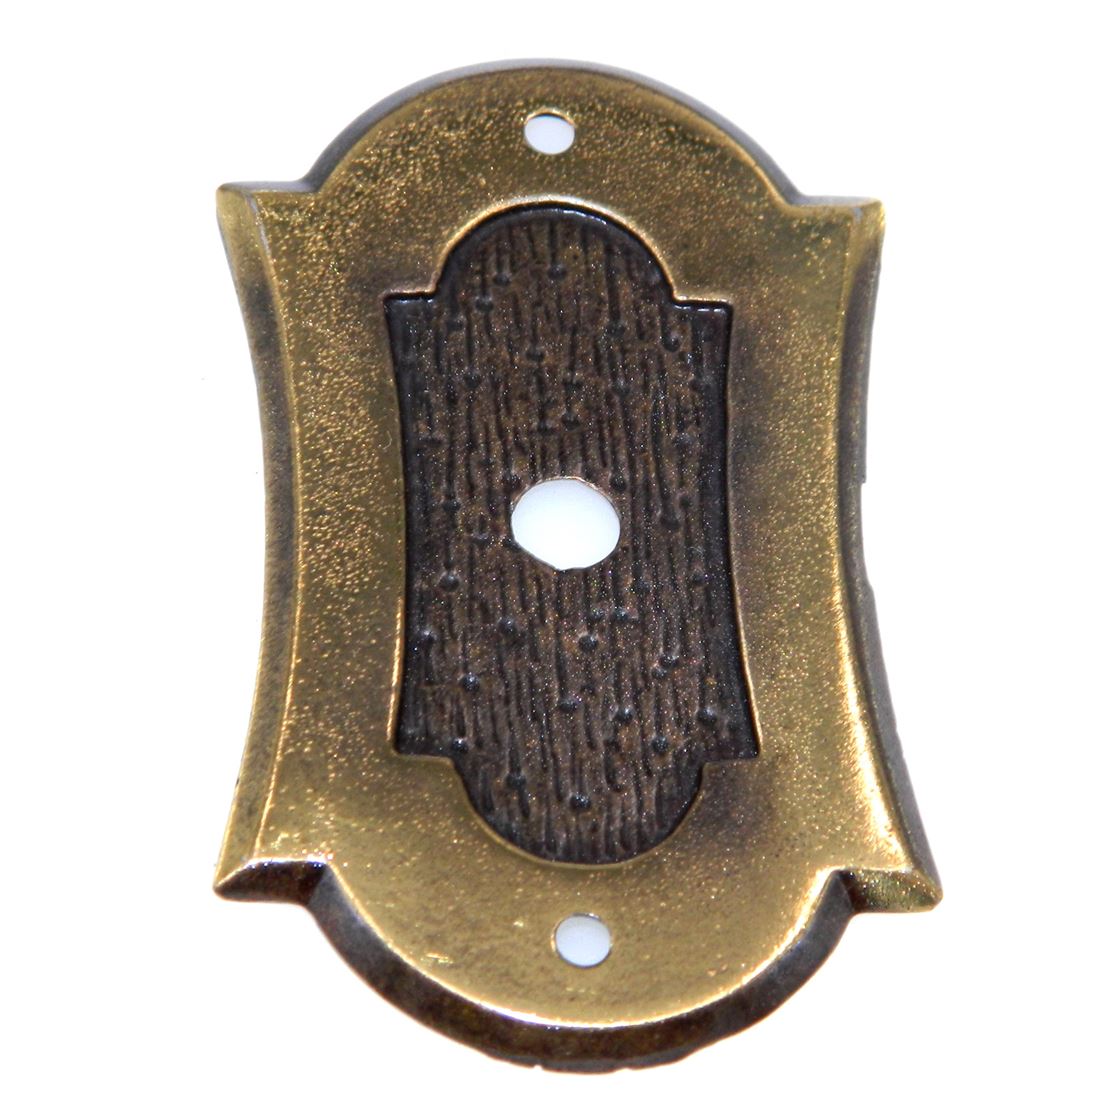 Vintage National Lock Antique English 2 1/2" Cabinet Knob Backplate 6331-4A